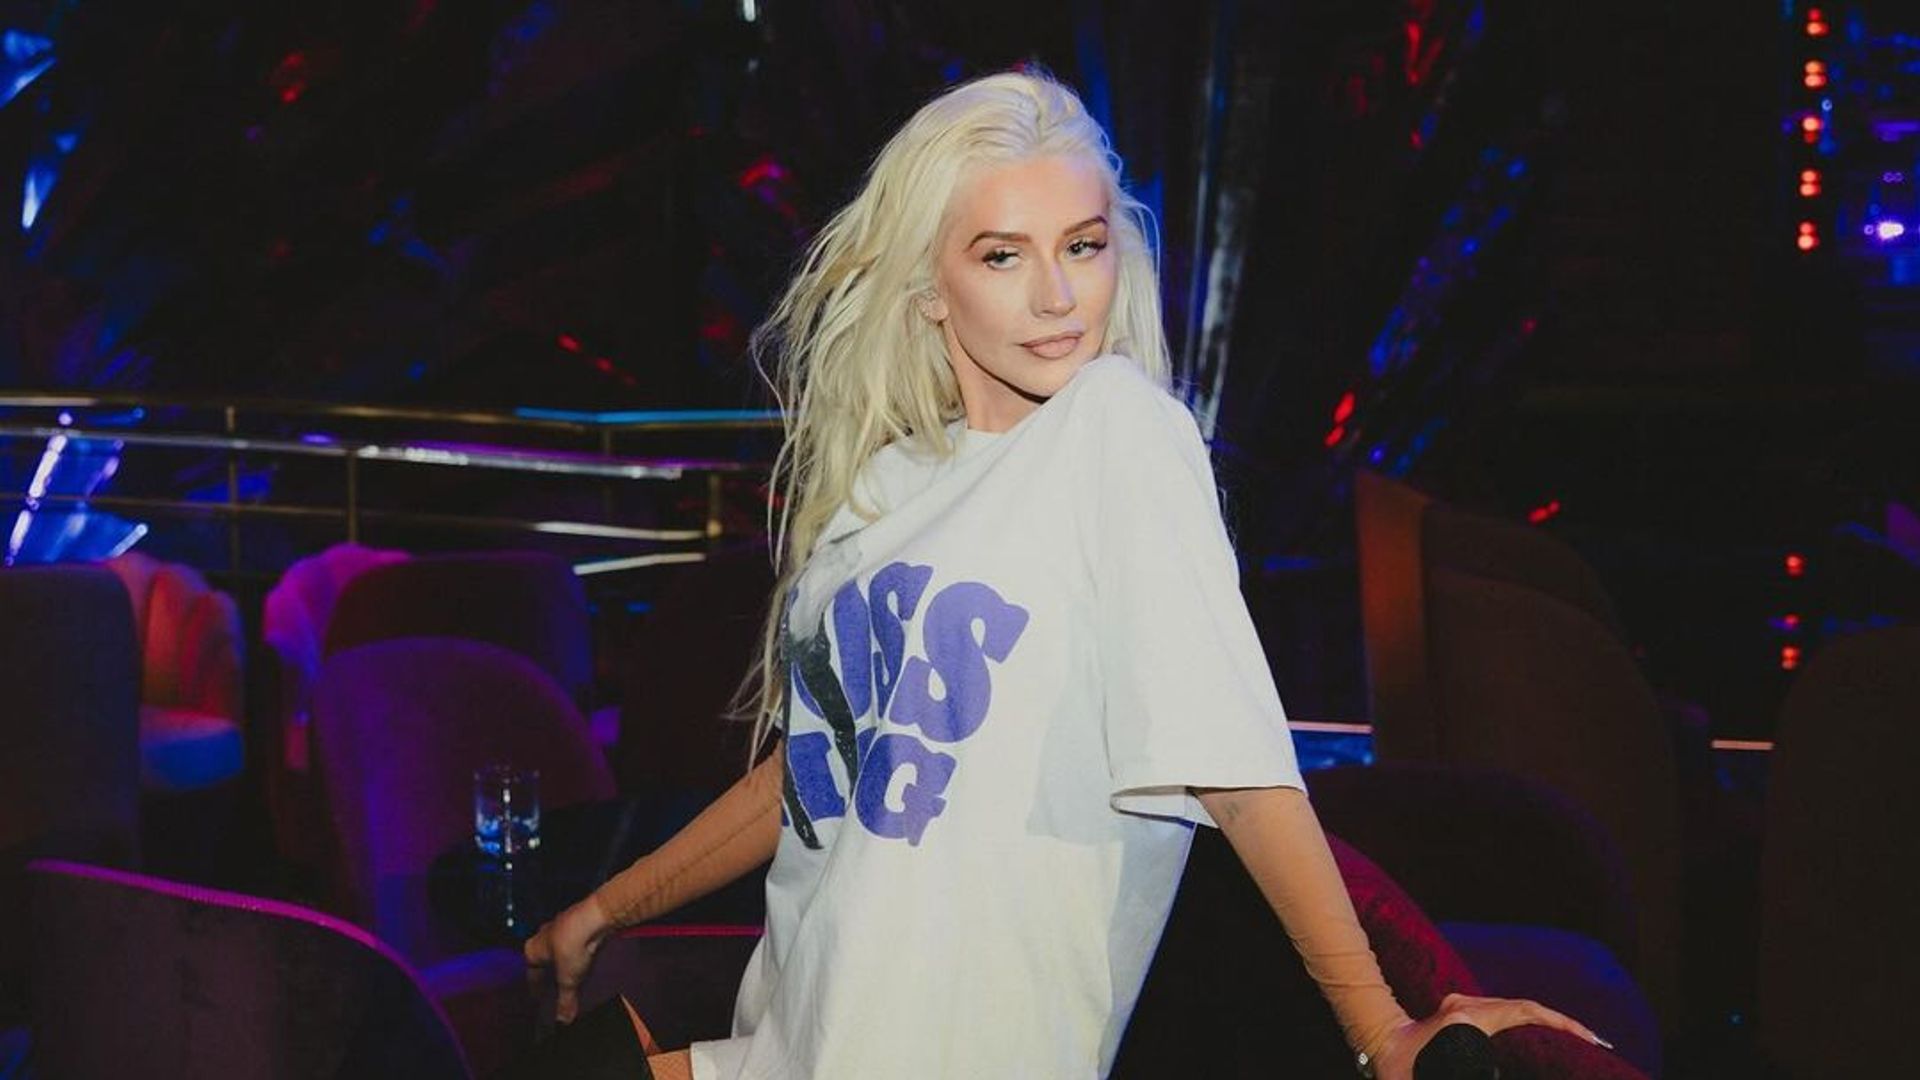 Christina Aguilera showcases her slender physique in T-shirt and thigh-high boots after losing 50 pounds